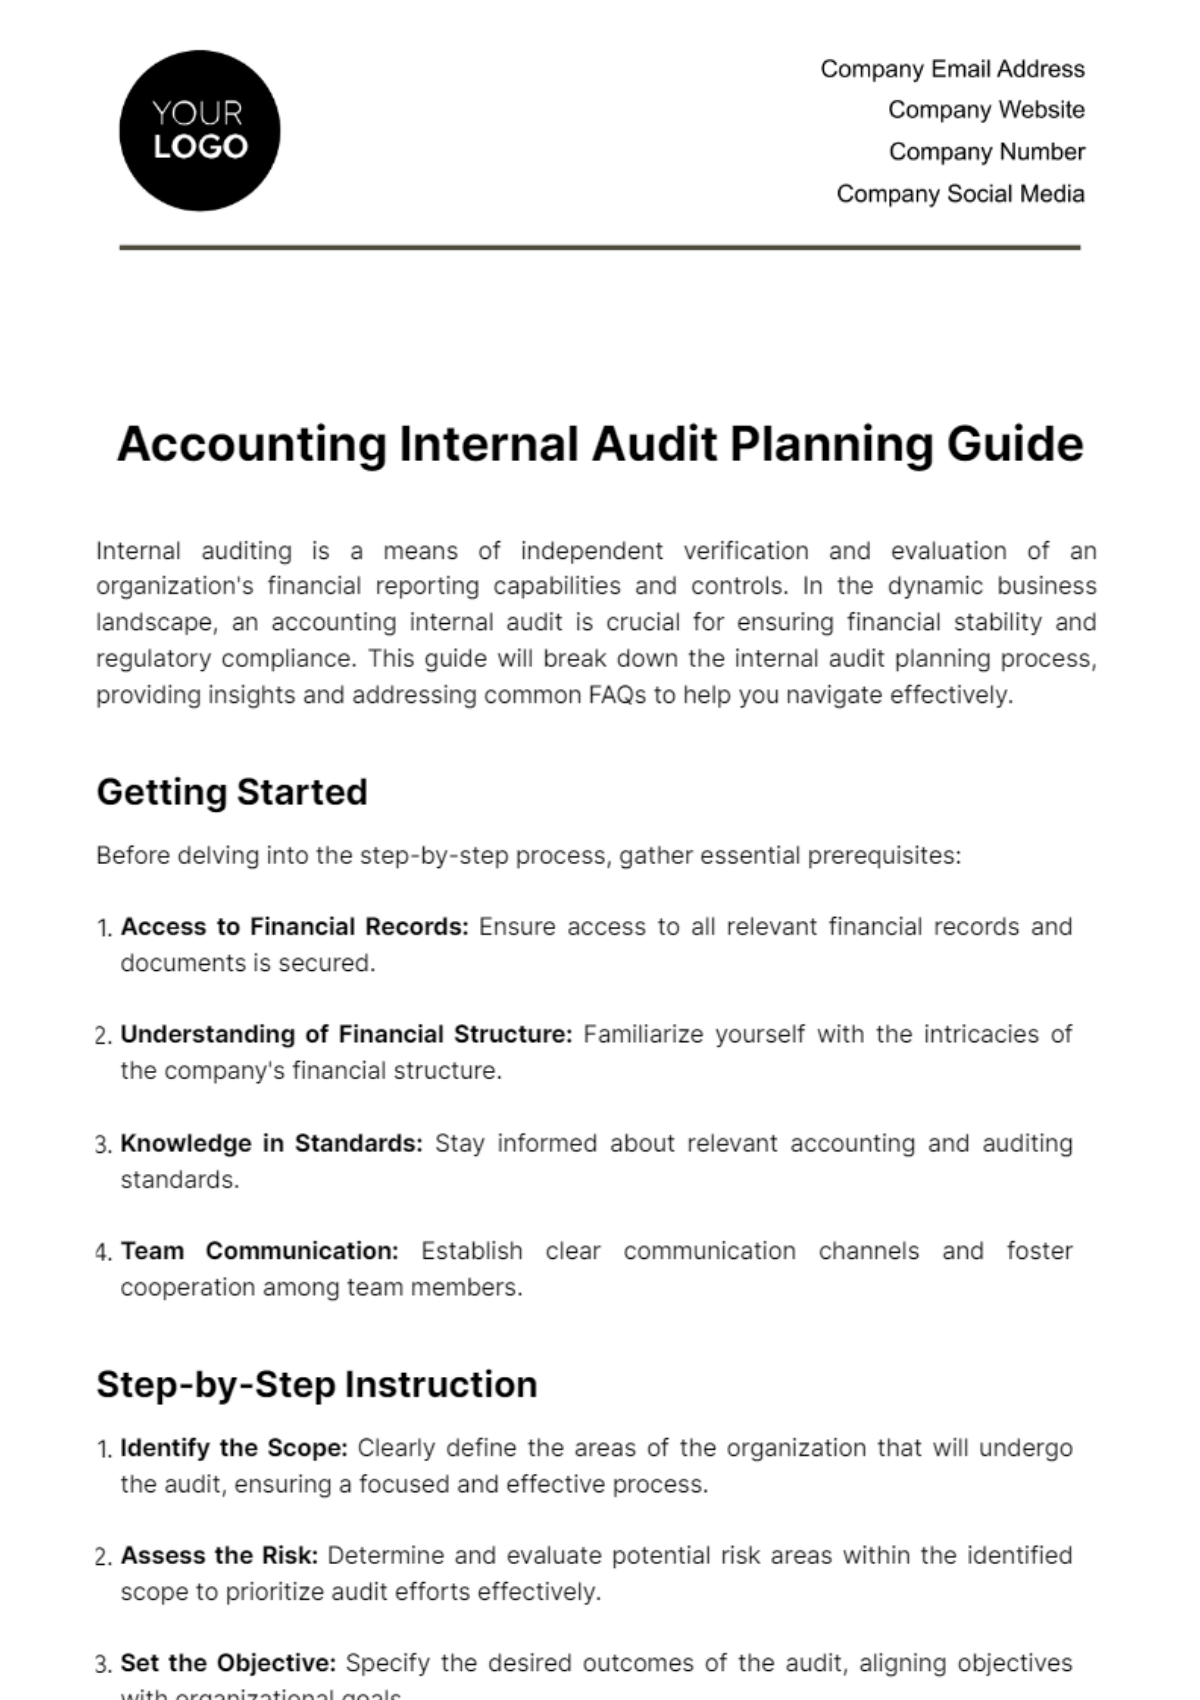 Accounting Internal Audit Planning Guide Template